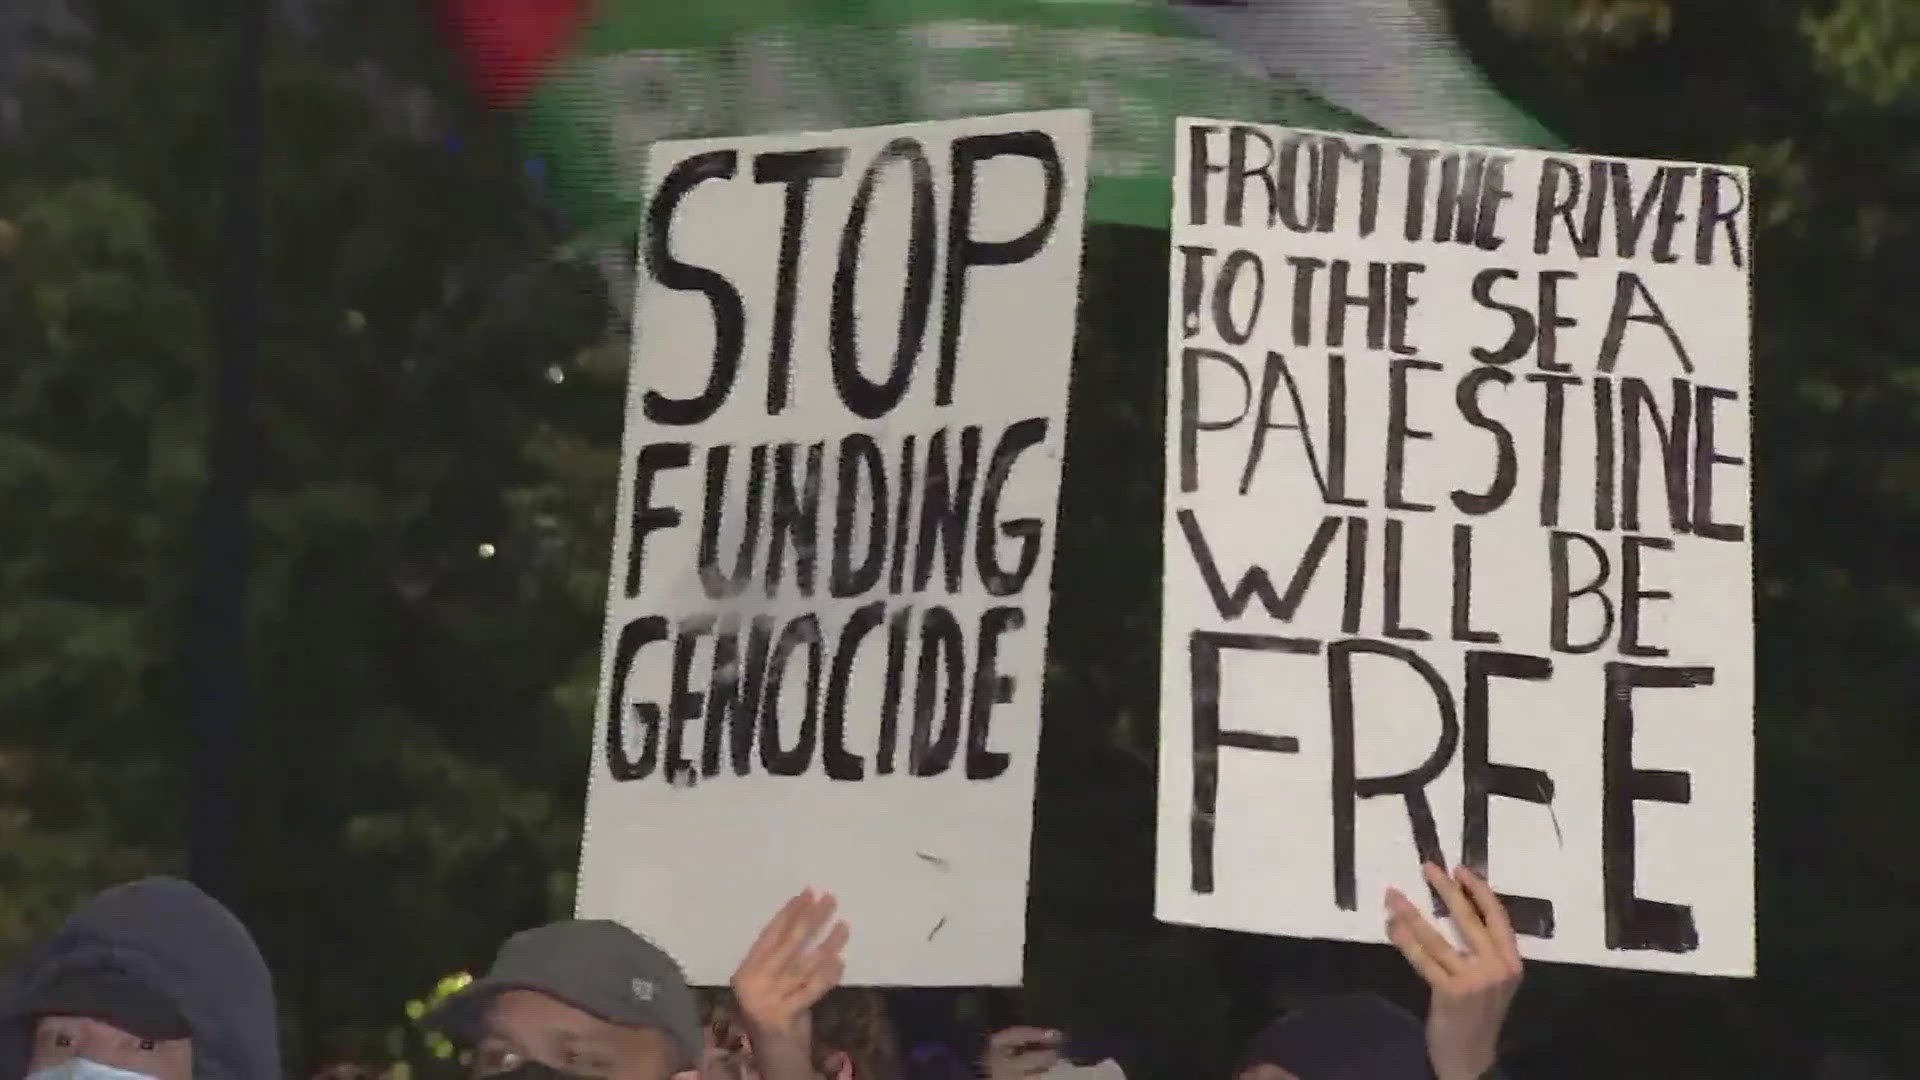 Another pro-Palestinian encampment was set up in Philadelphia on Saturday.